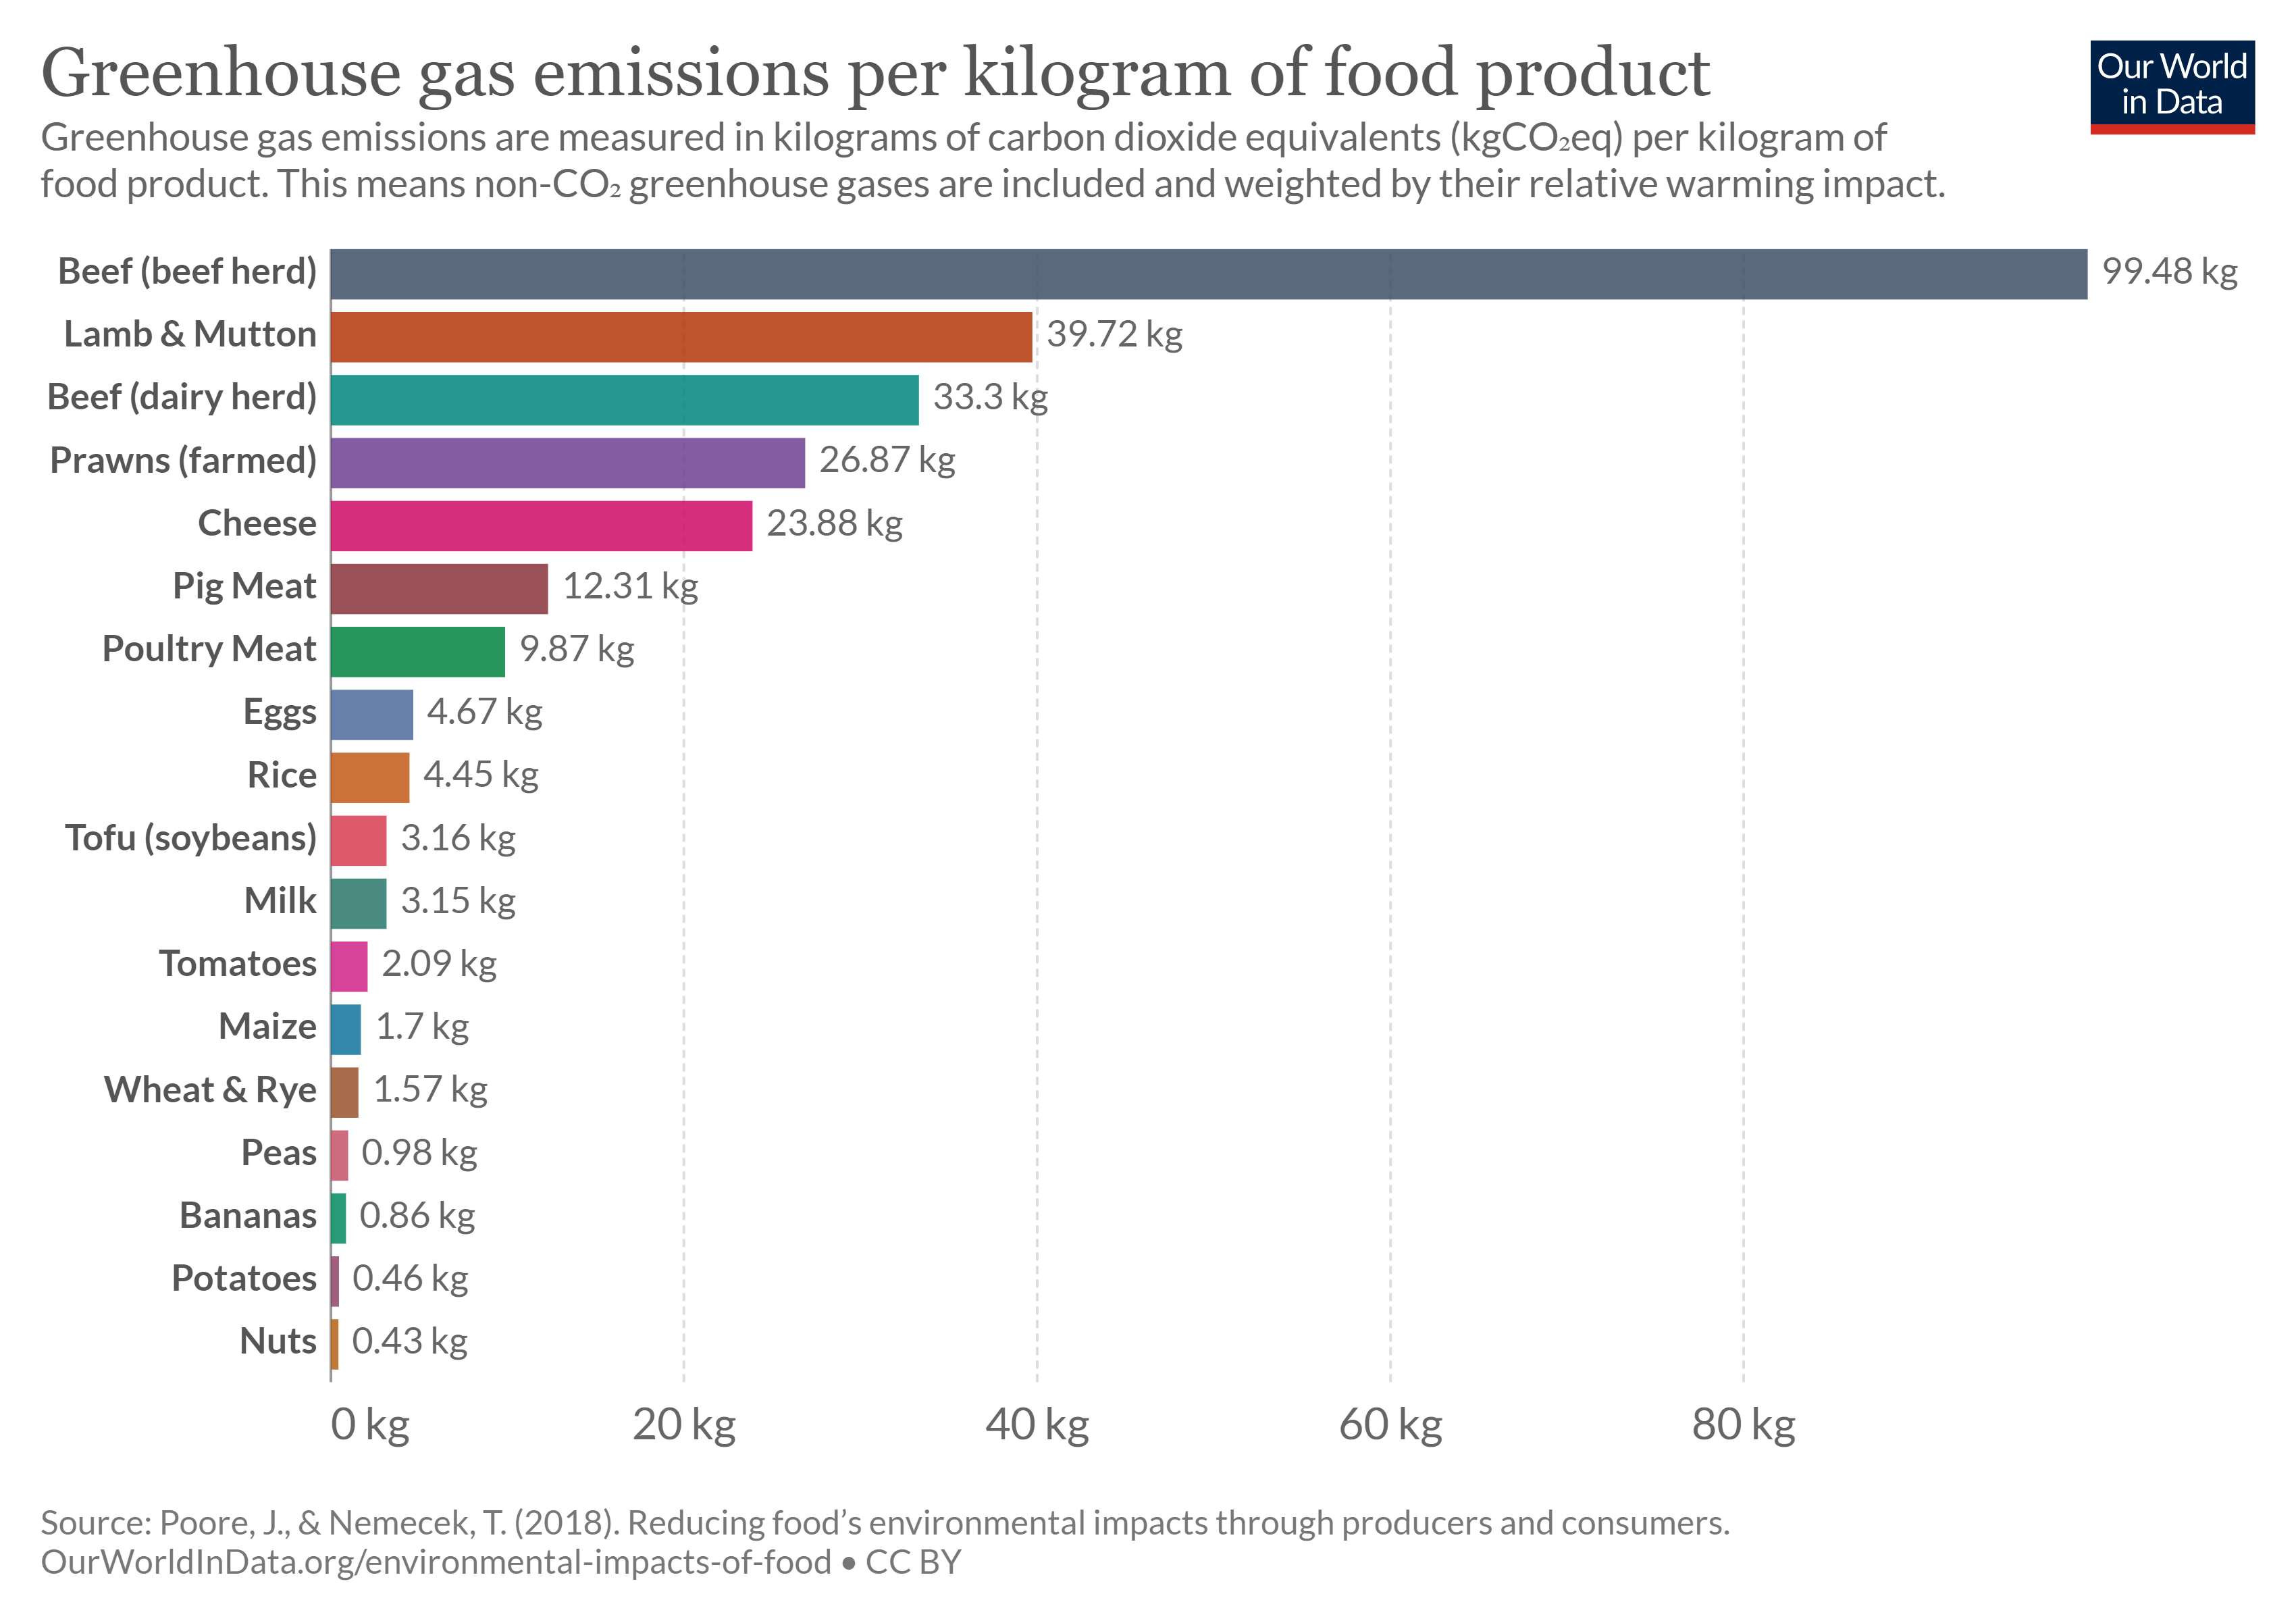 Chart showing greenhouse gas emissions from different foods.